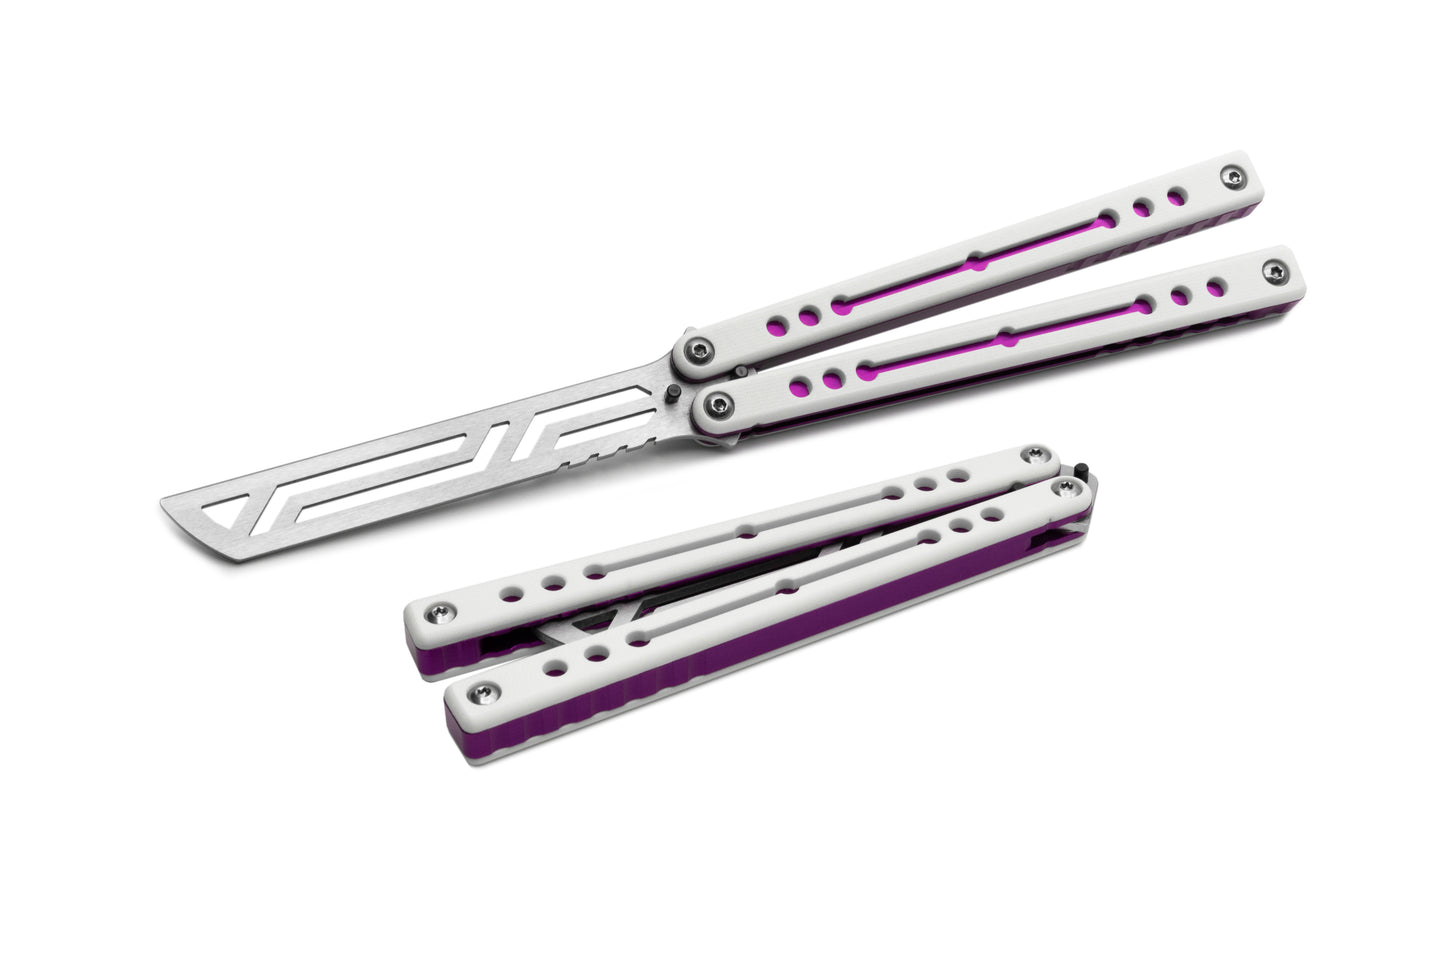 Winter Purple NautilusV2 balisong with g10 scales